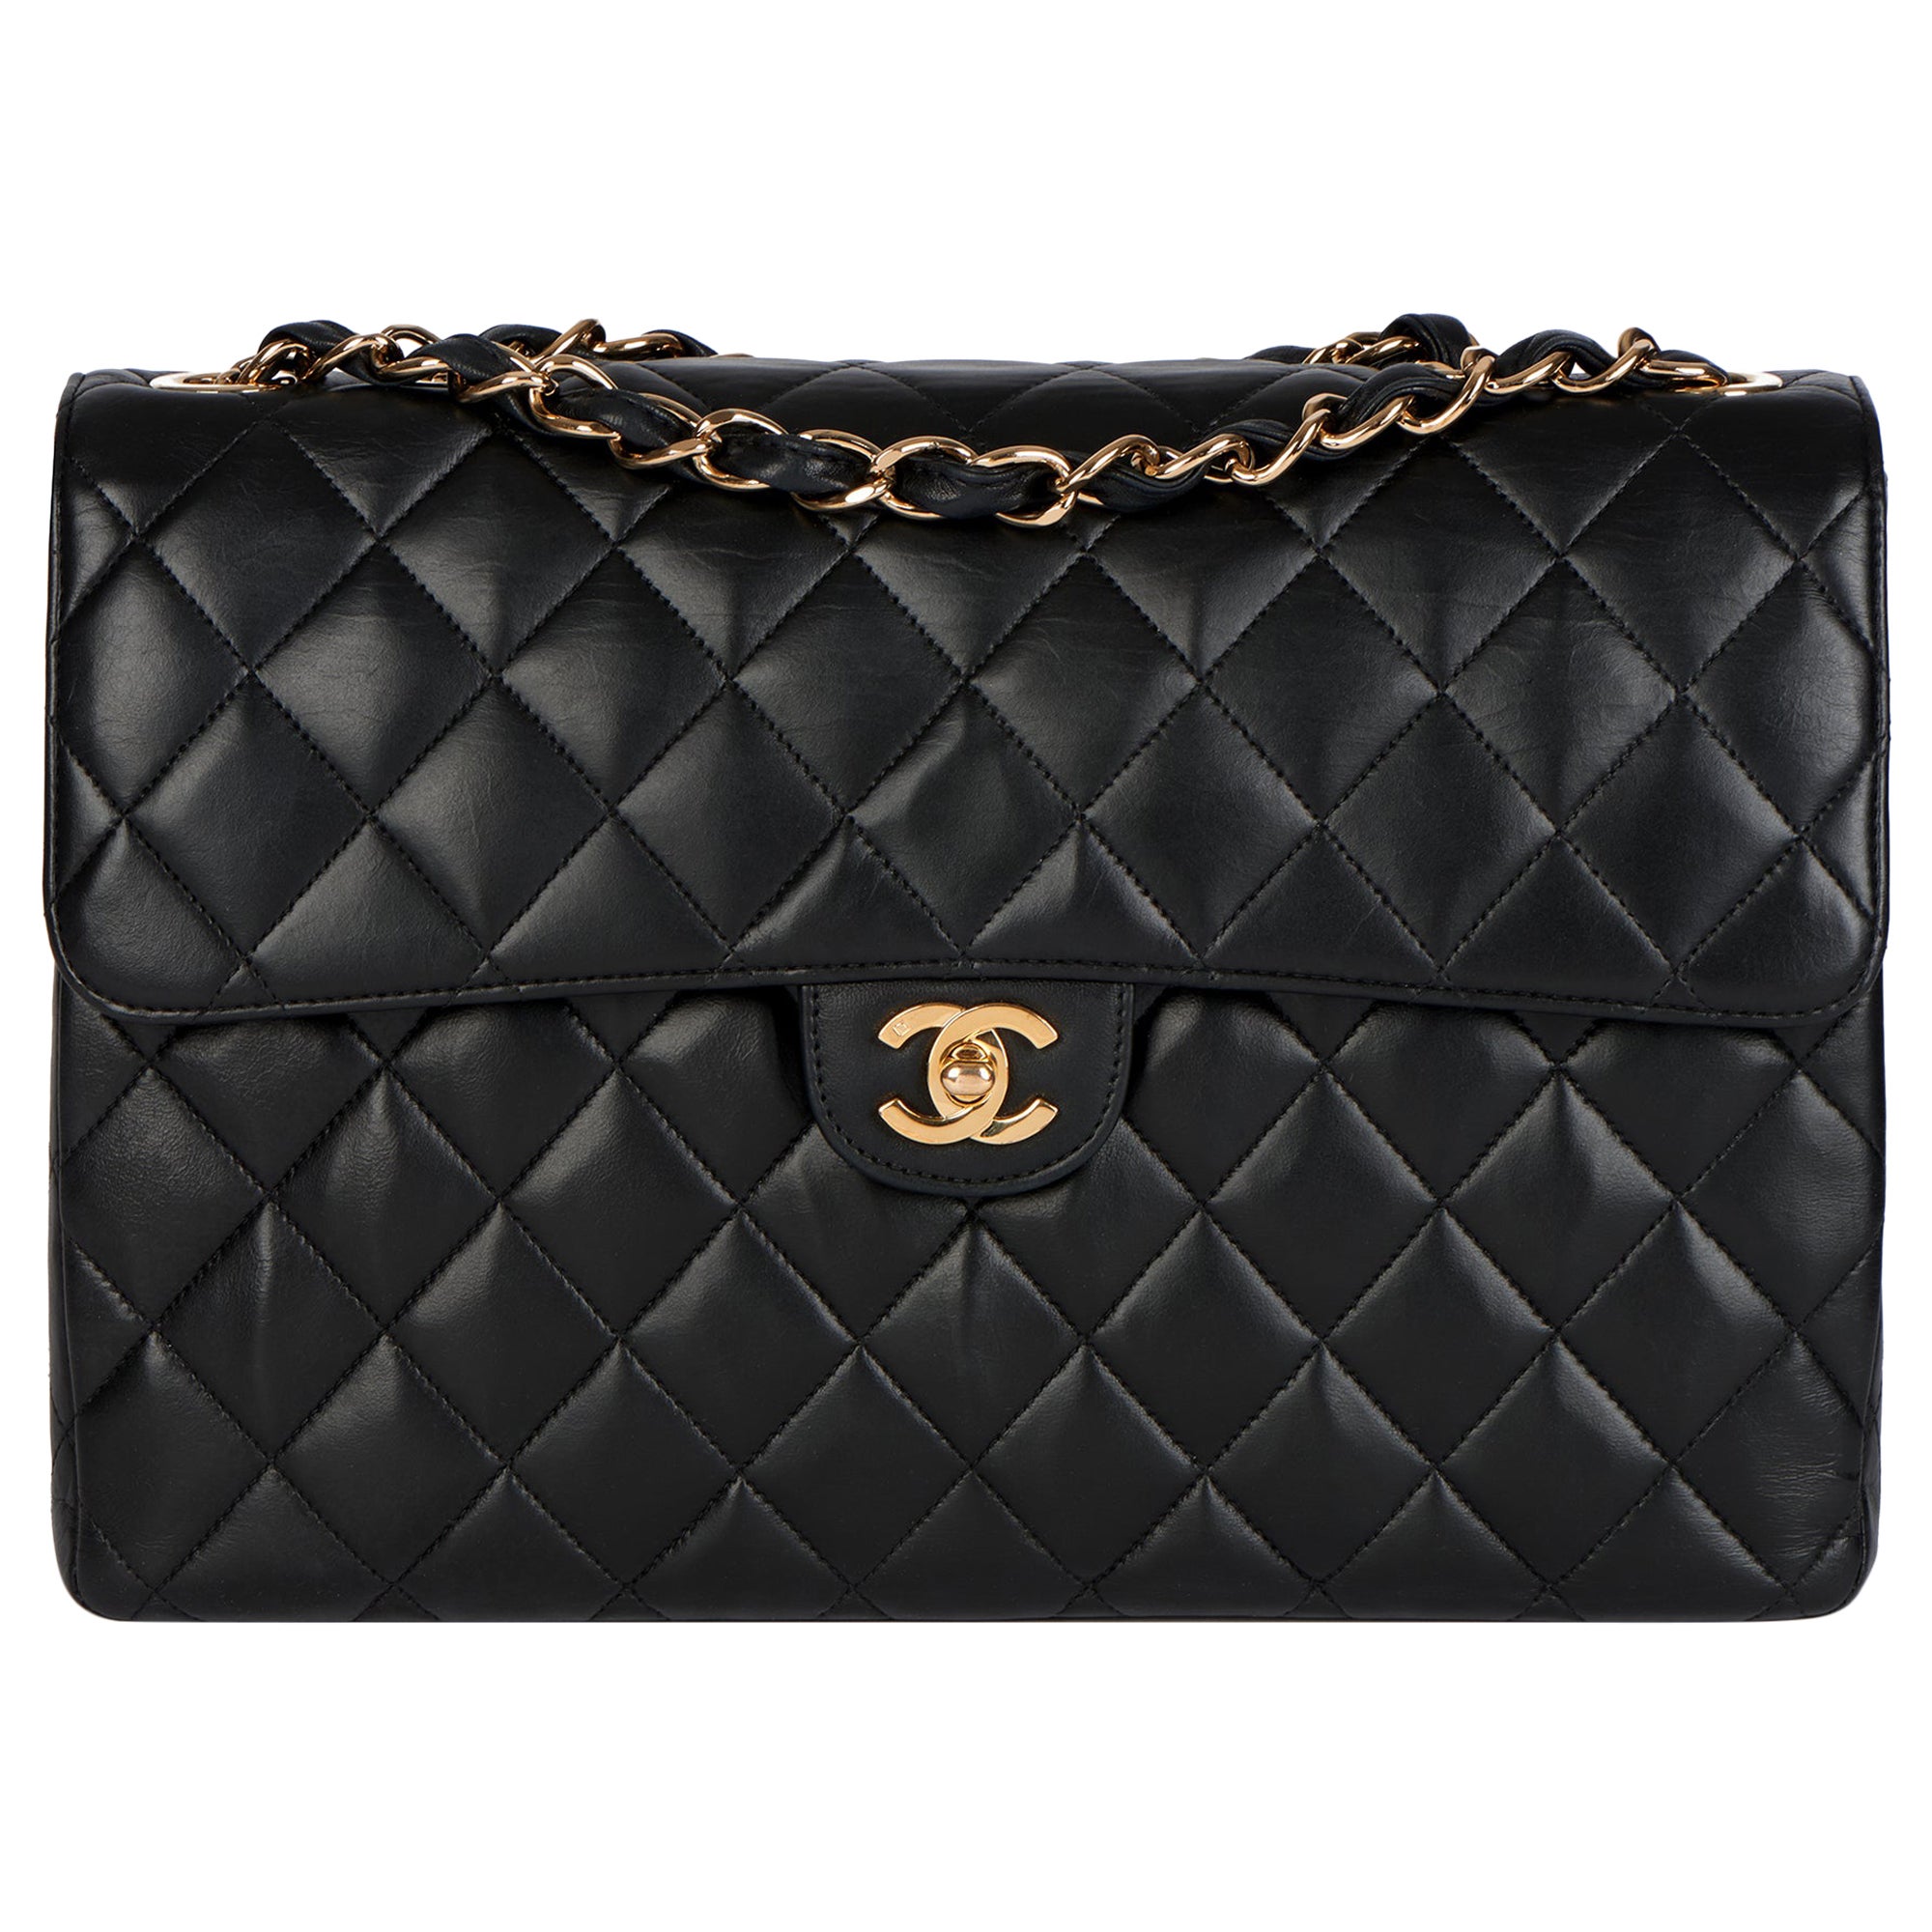 Chanel Black Quilted Lambskin Leather Vintage Jumbo Classic Single Flap Bag